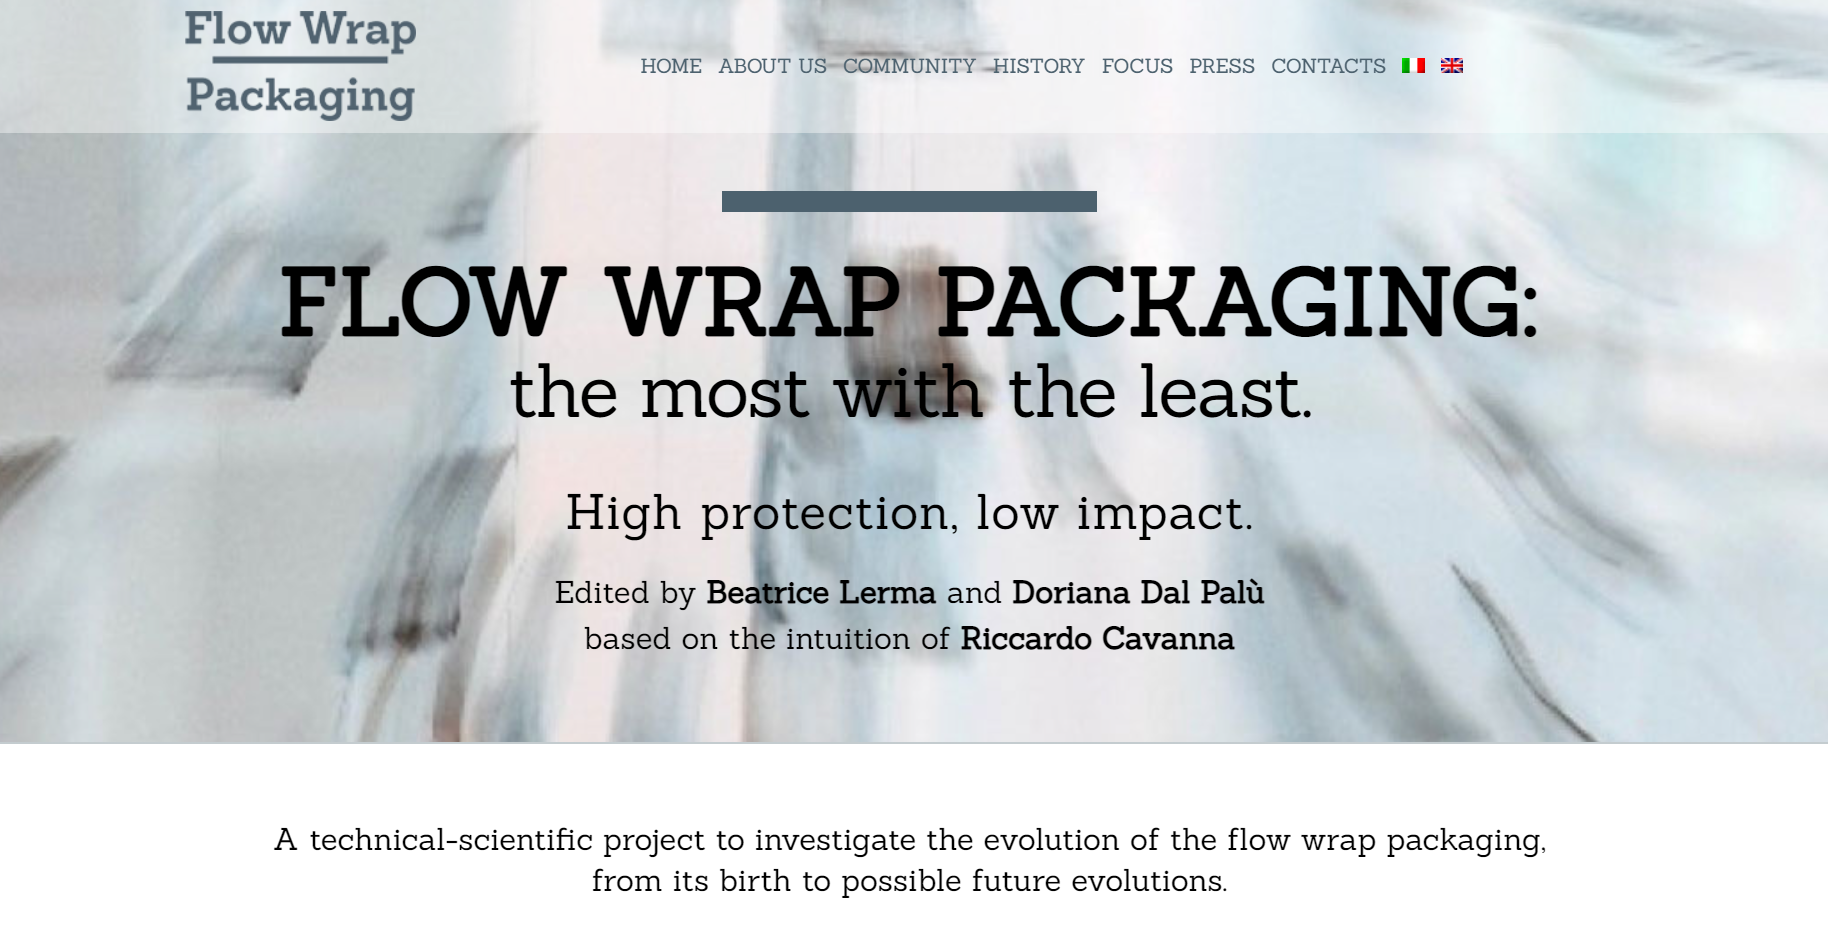 A technical-scientific project to investigate the evolution of the flow wrap packaging